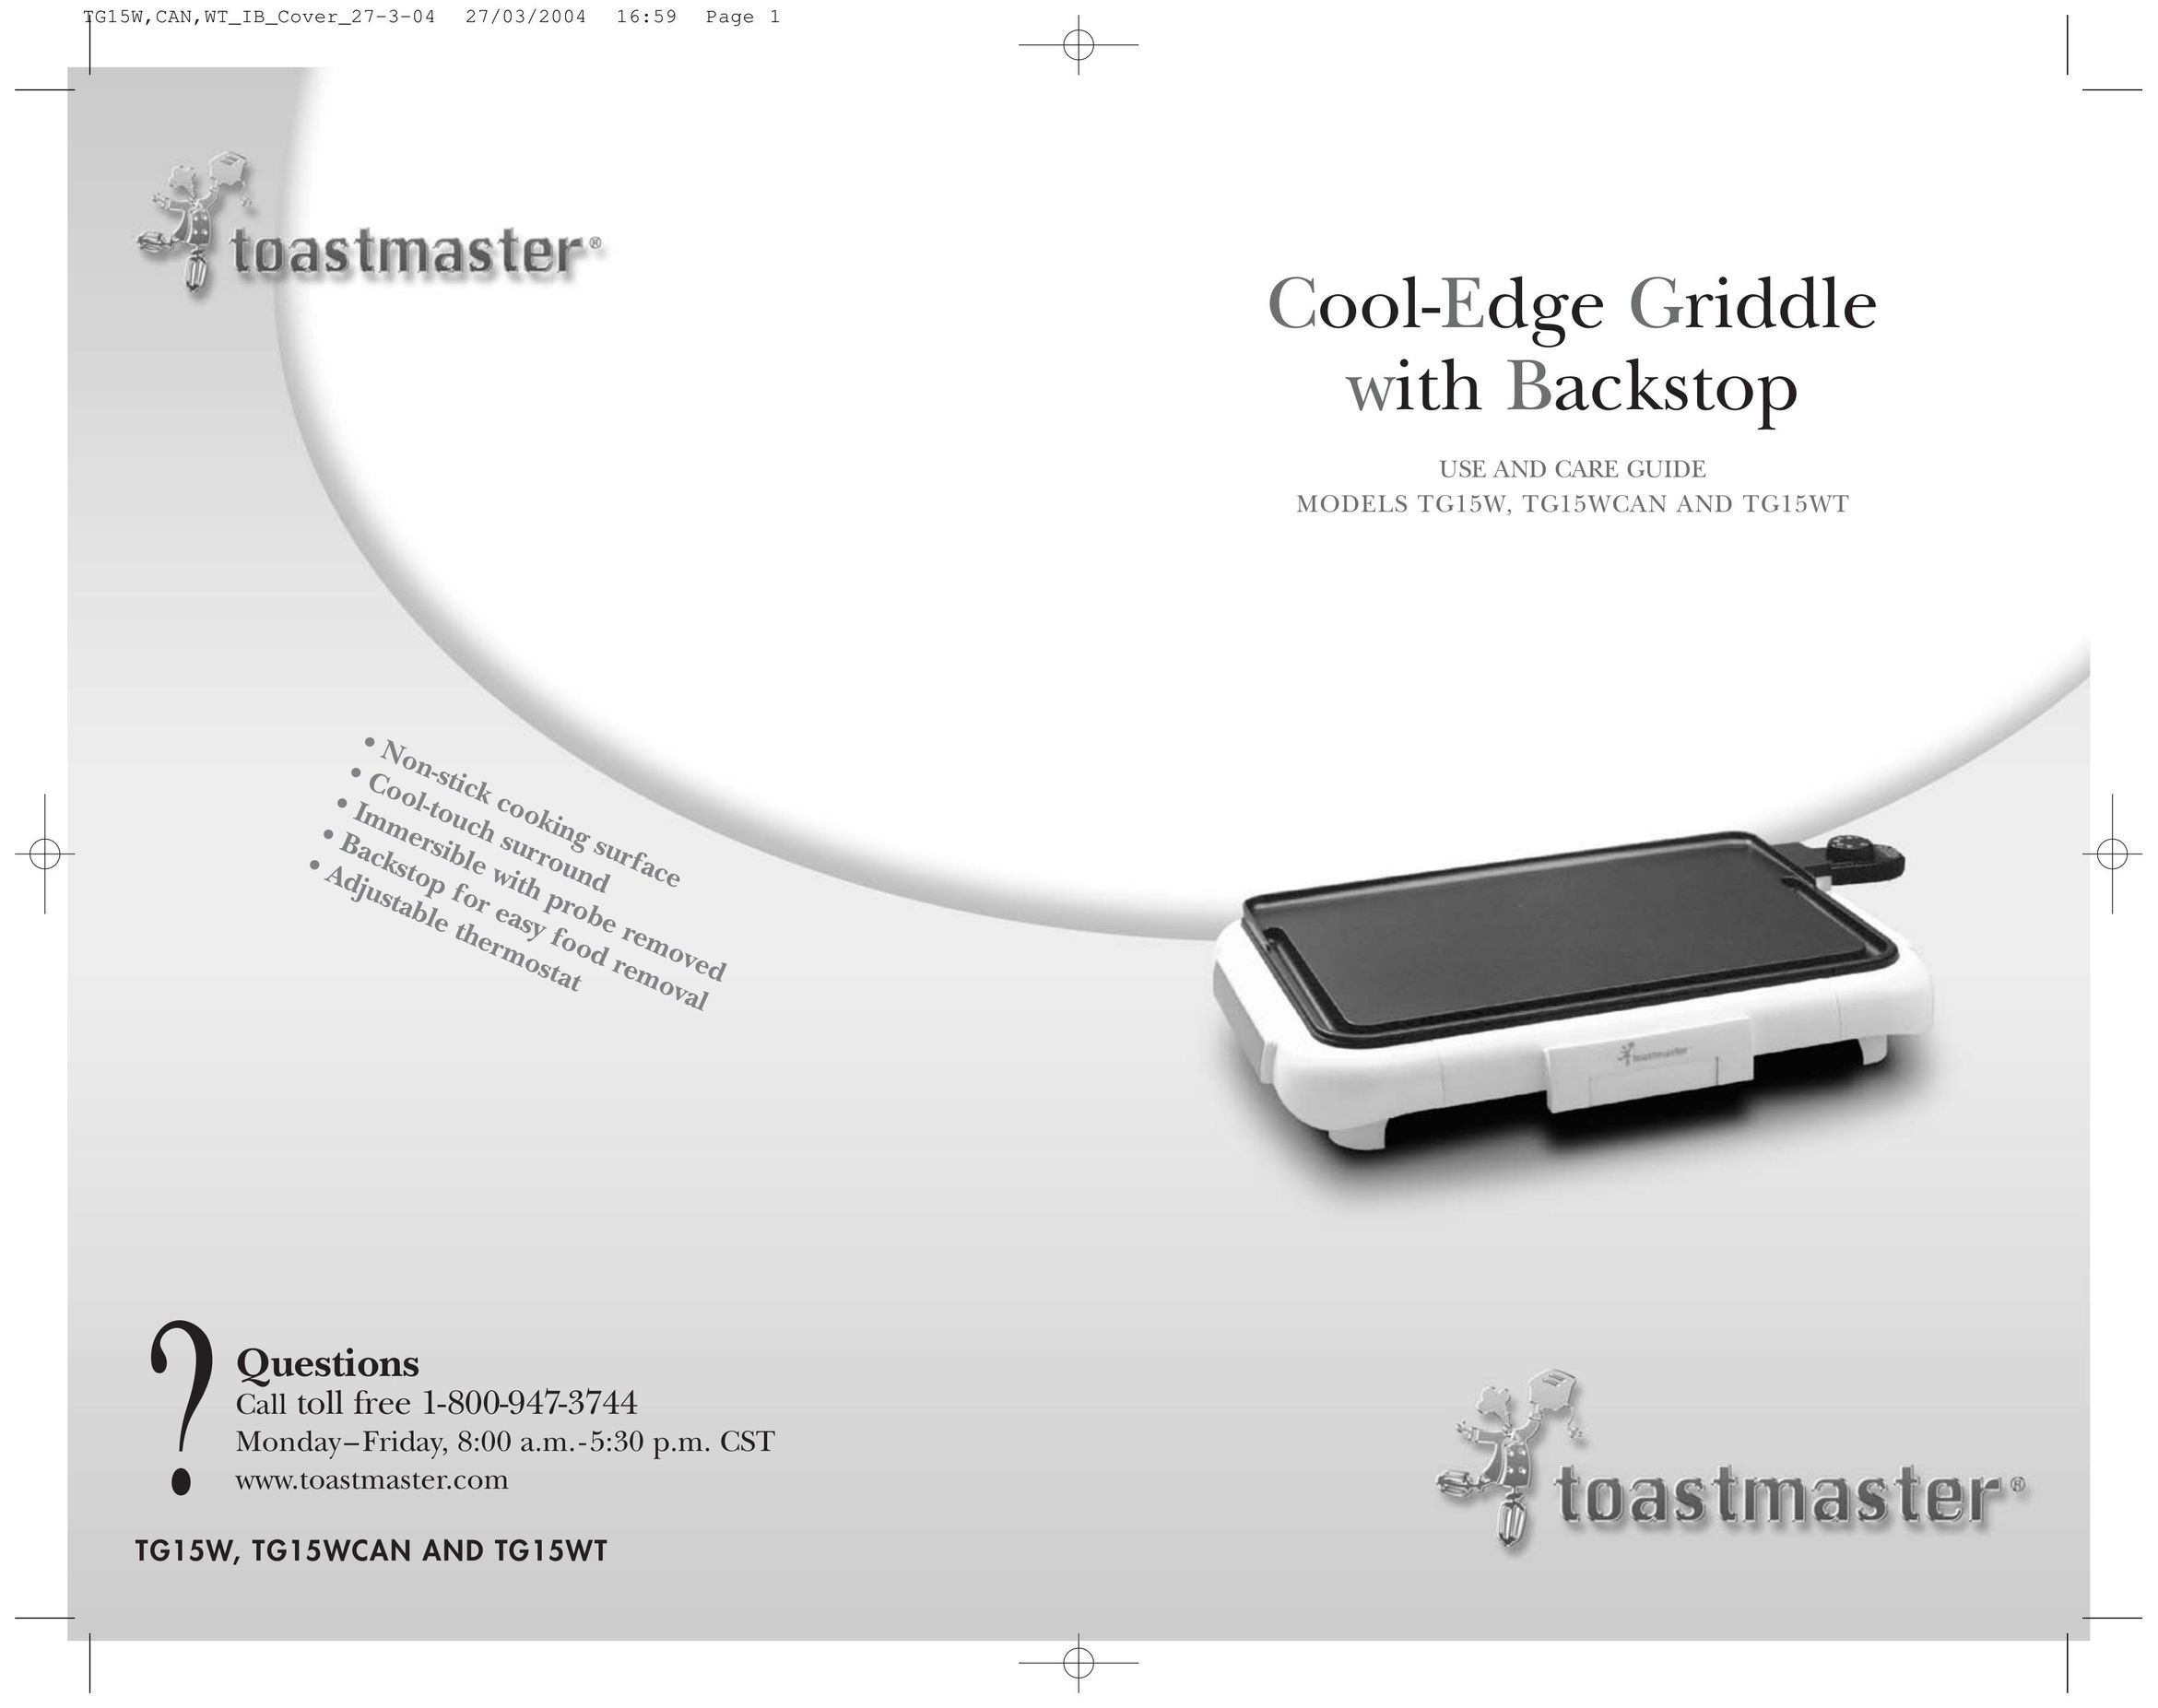 Toastmaster TG15WCAN, TG15WT Griddle User Manual